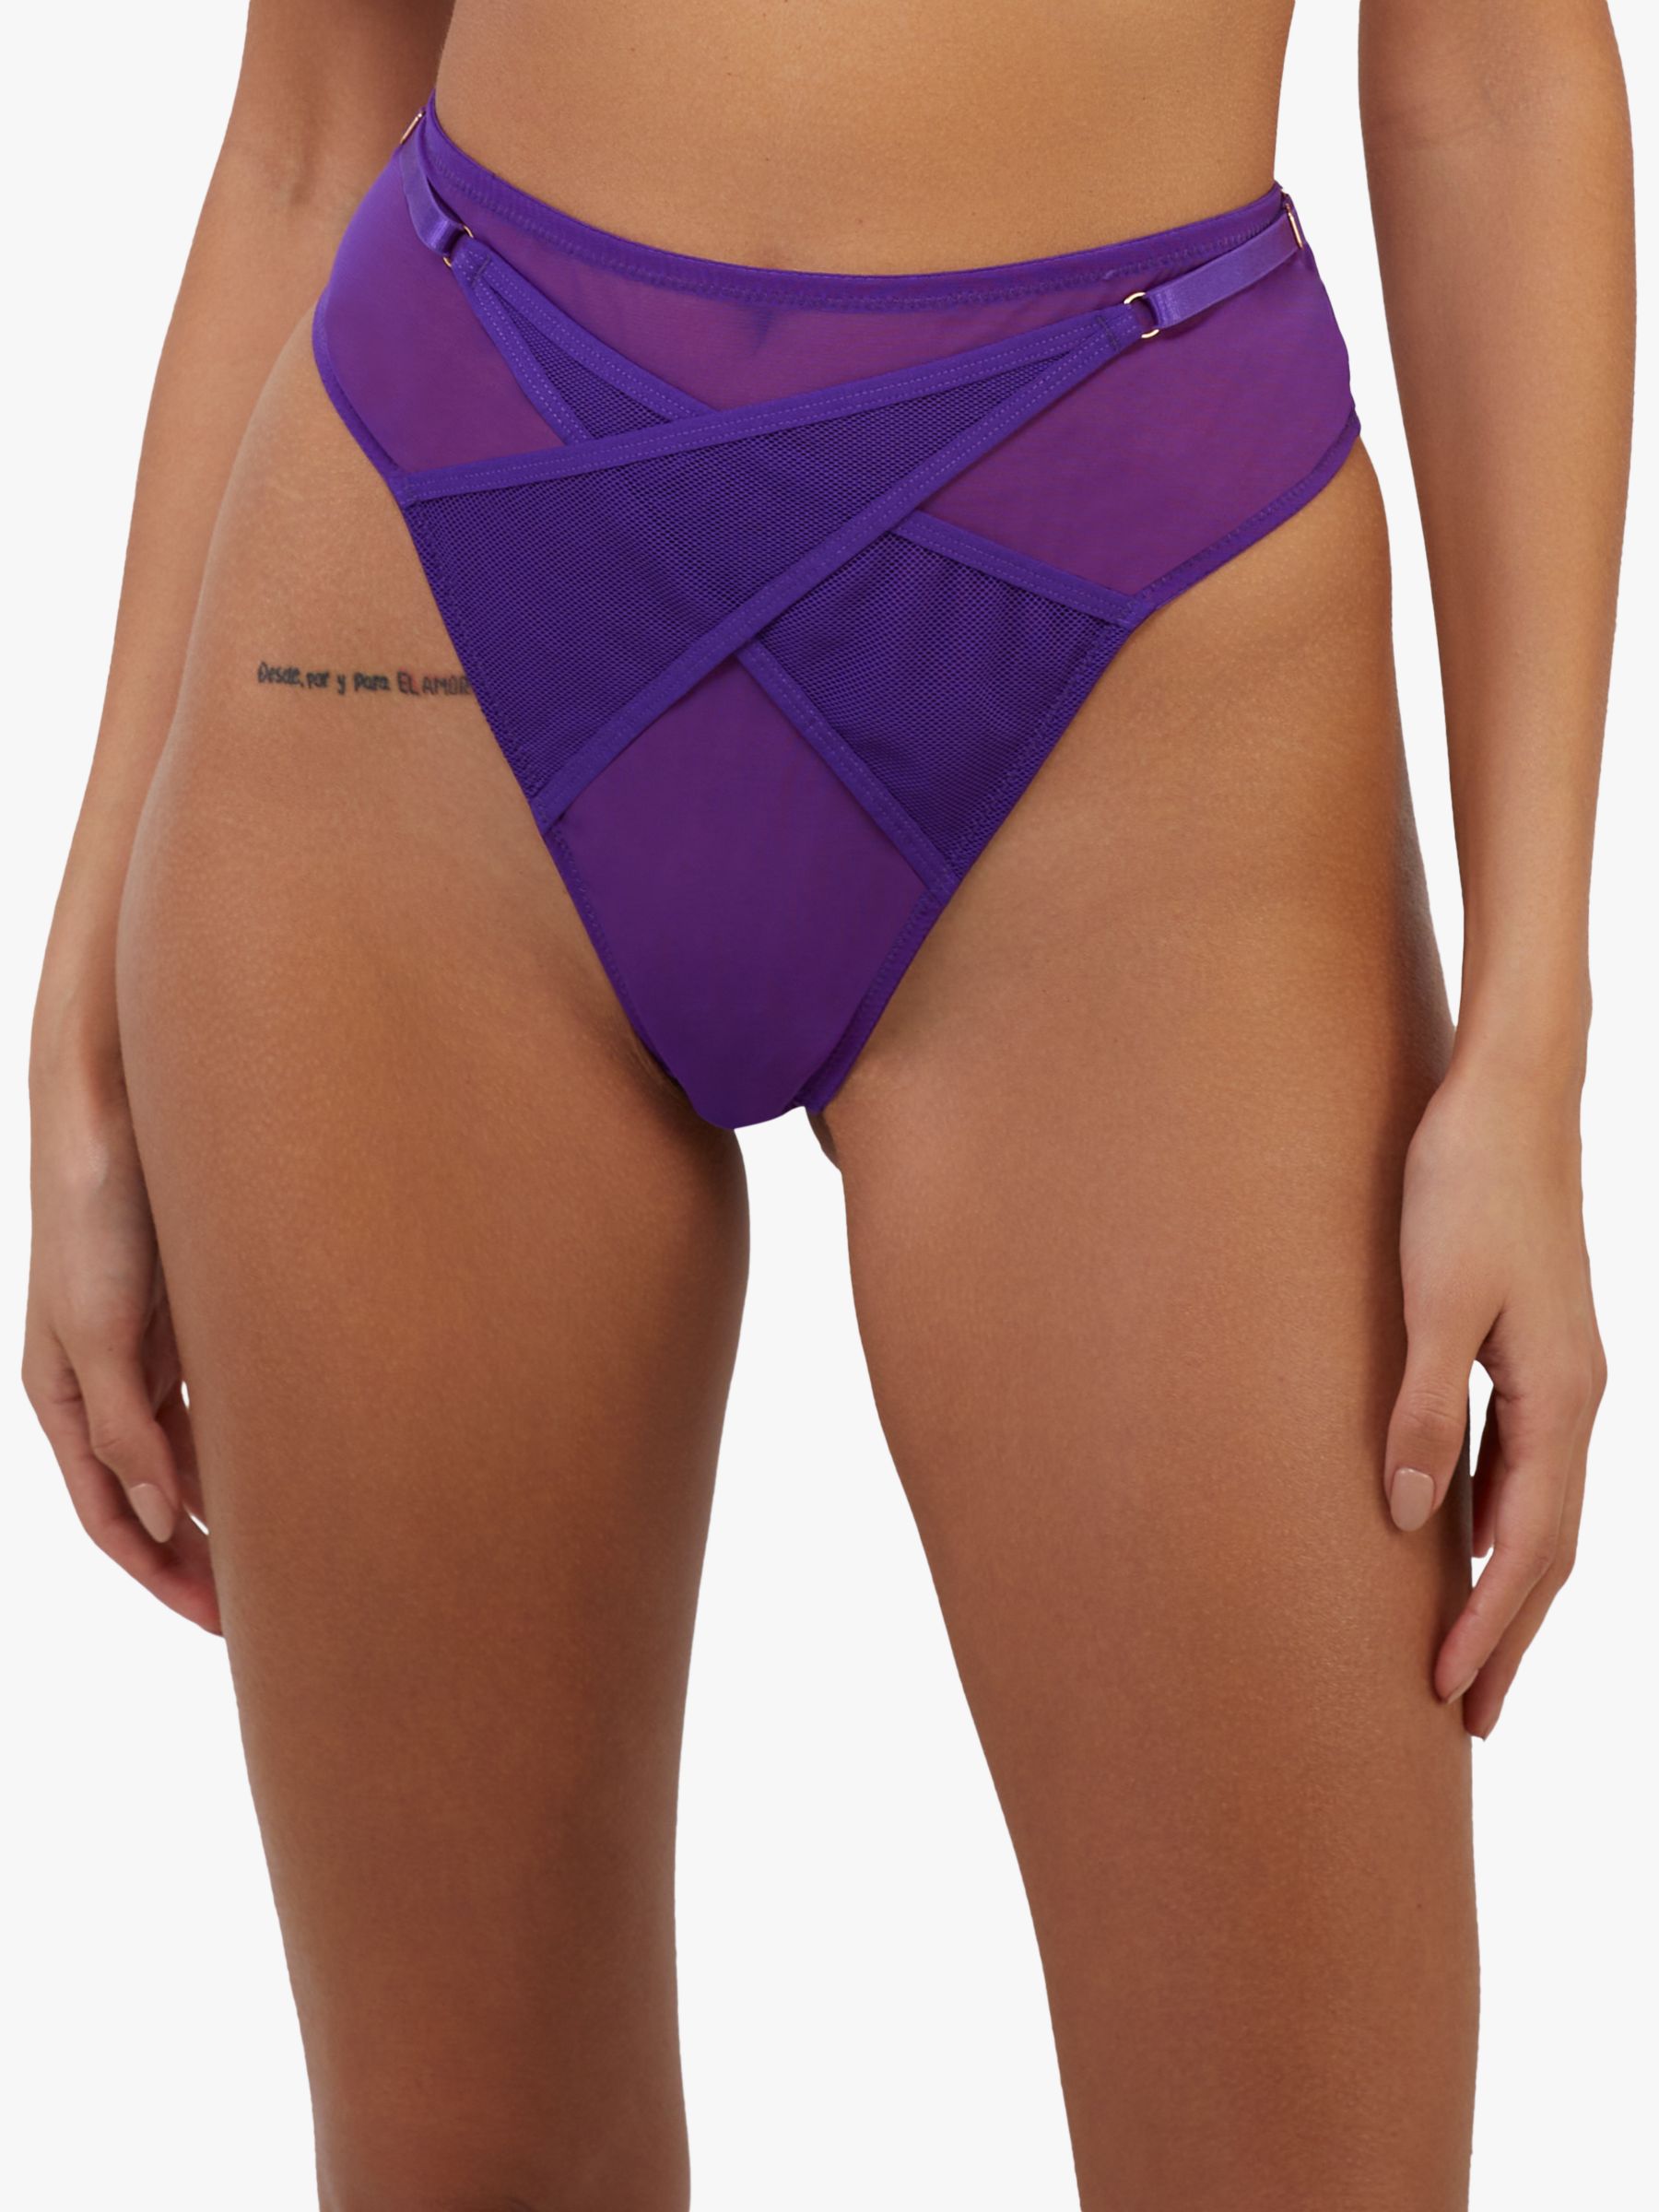 Playful Promises Eddie Crossover Thong, Electric Purple, 8